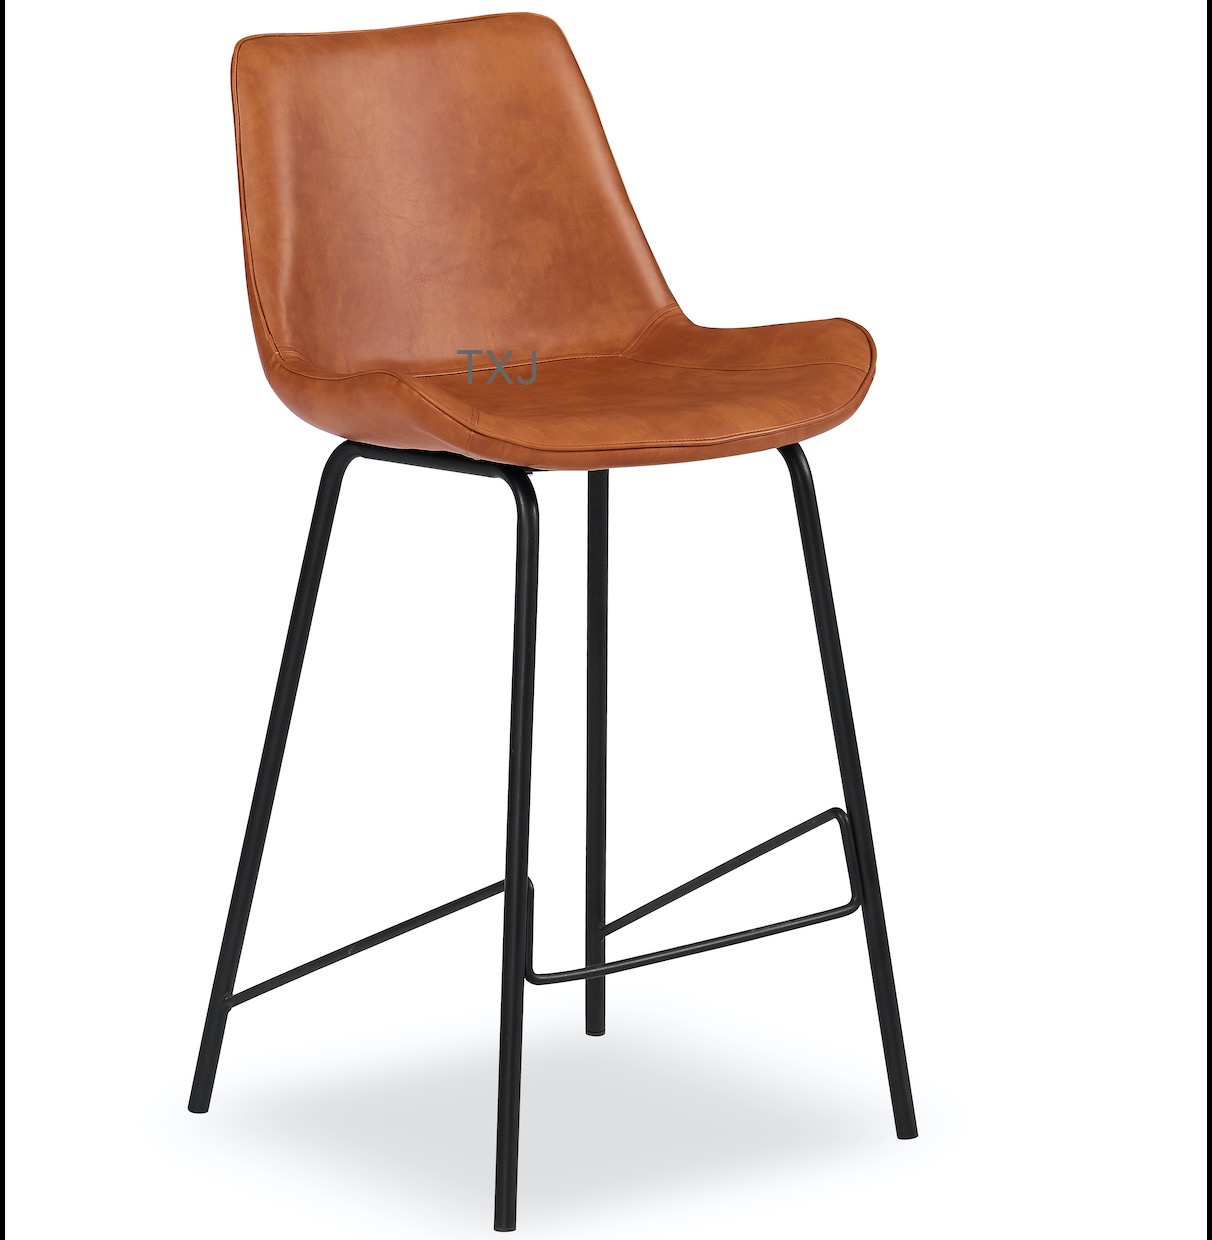 TXJ TC2061 Barstool Barchair For Kitchen Room Featured Image